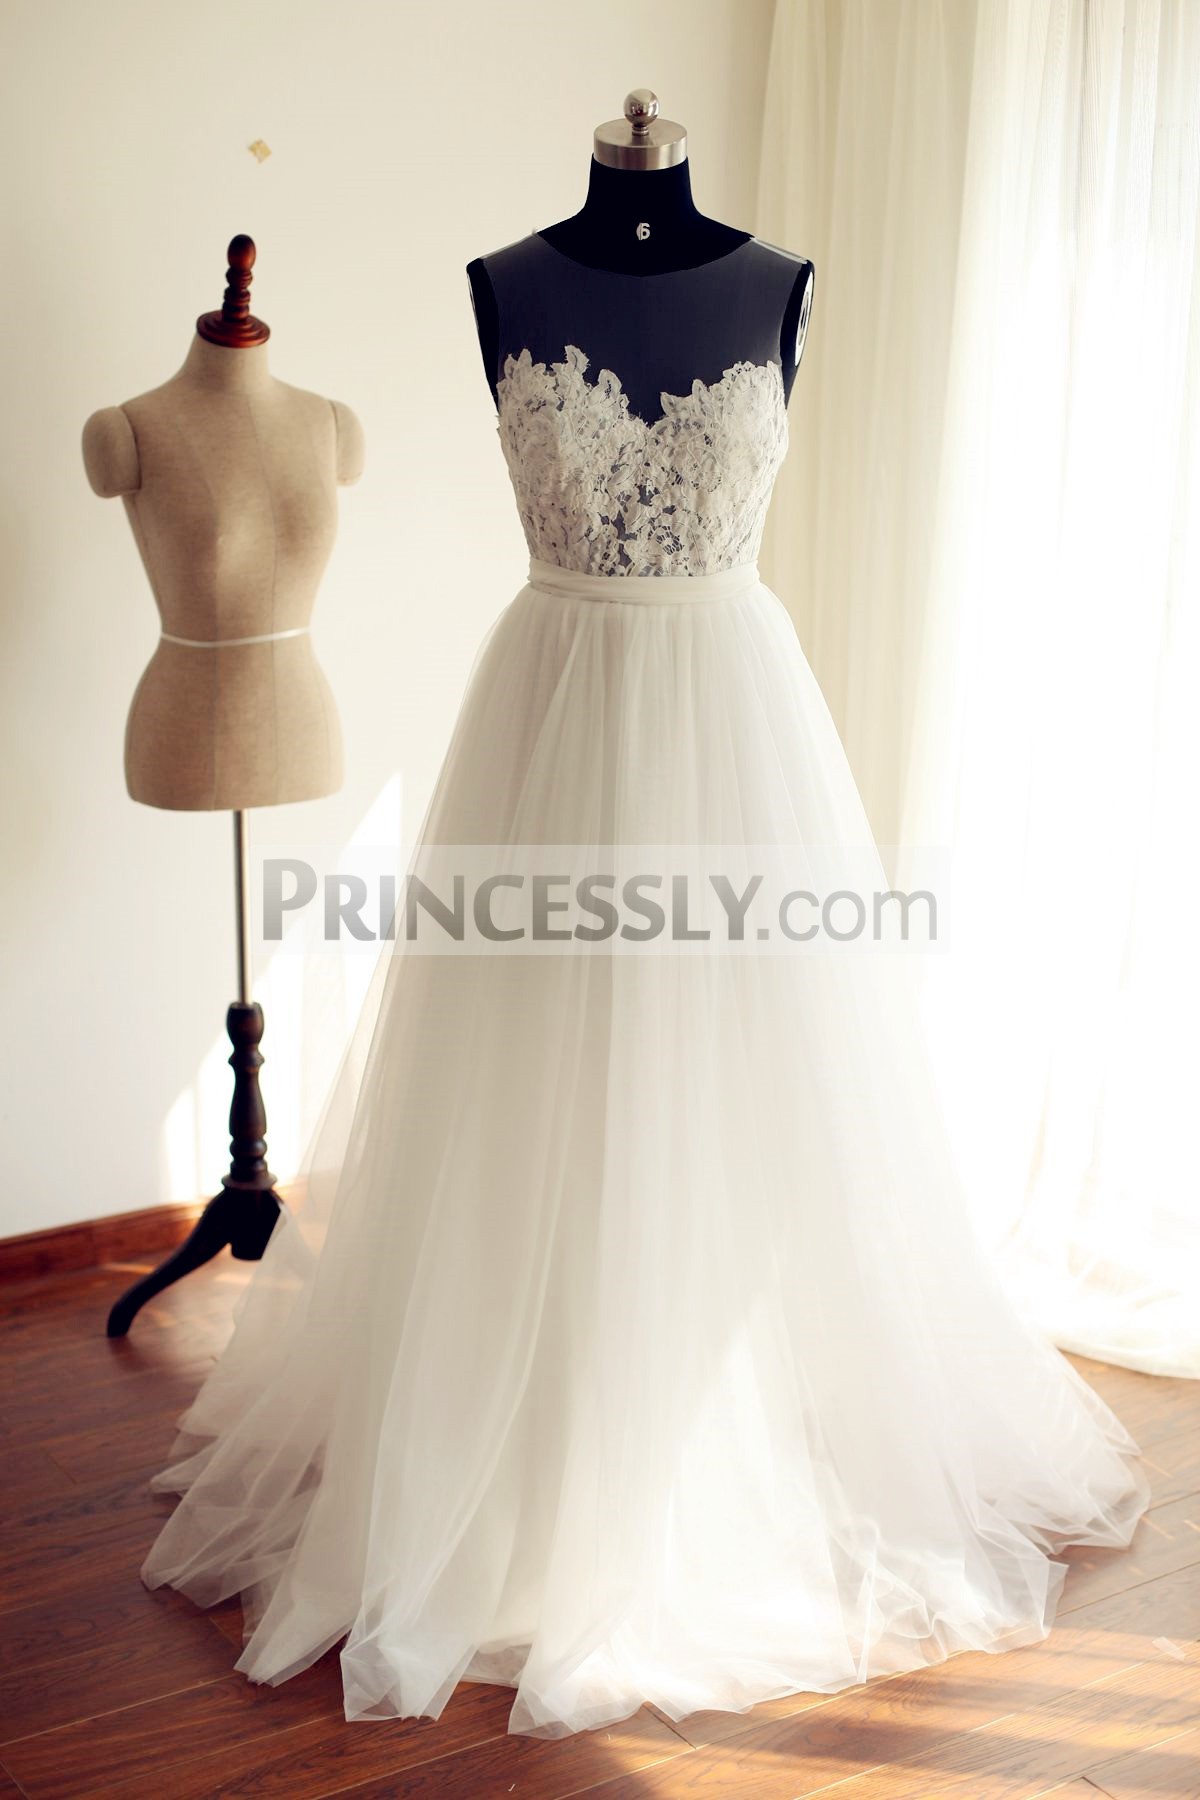 Princessly.com-K1000240-Sheer See Through Ivory Lace Tulle Wedding Dress-31